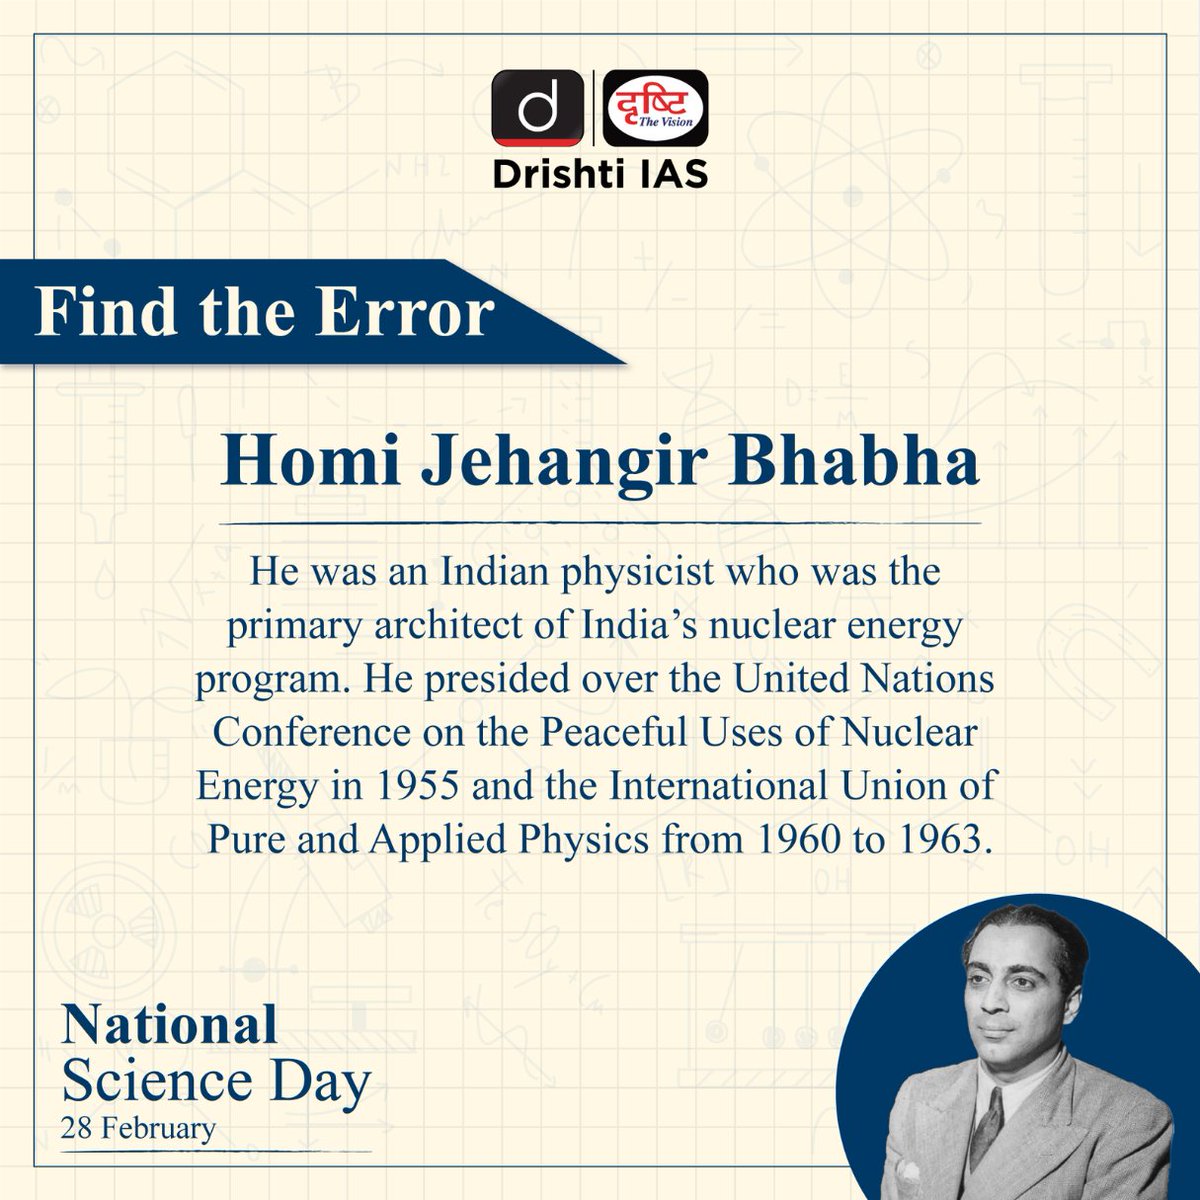 Get ready for an explosion of knowledge! National Science Day #Quiz is here to tickle your brain cells and make you a science genius!

#NationalScienceDay #ScienceDay #RamanEffect #CVRaman #Scientists #IndianScientist #NobelPrize #ScienceIsFun #UPSC #DrishtiIAS #DrishtiIASEnglish